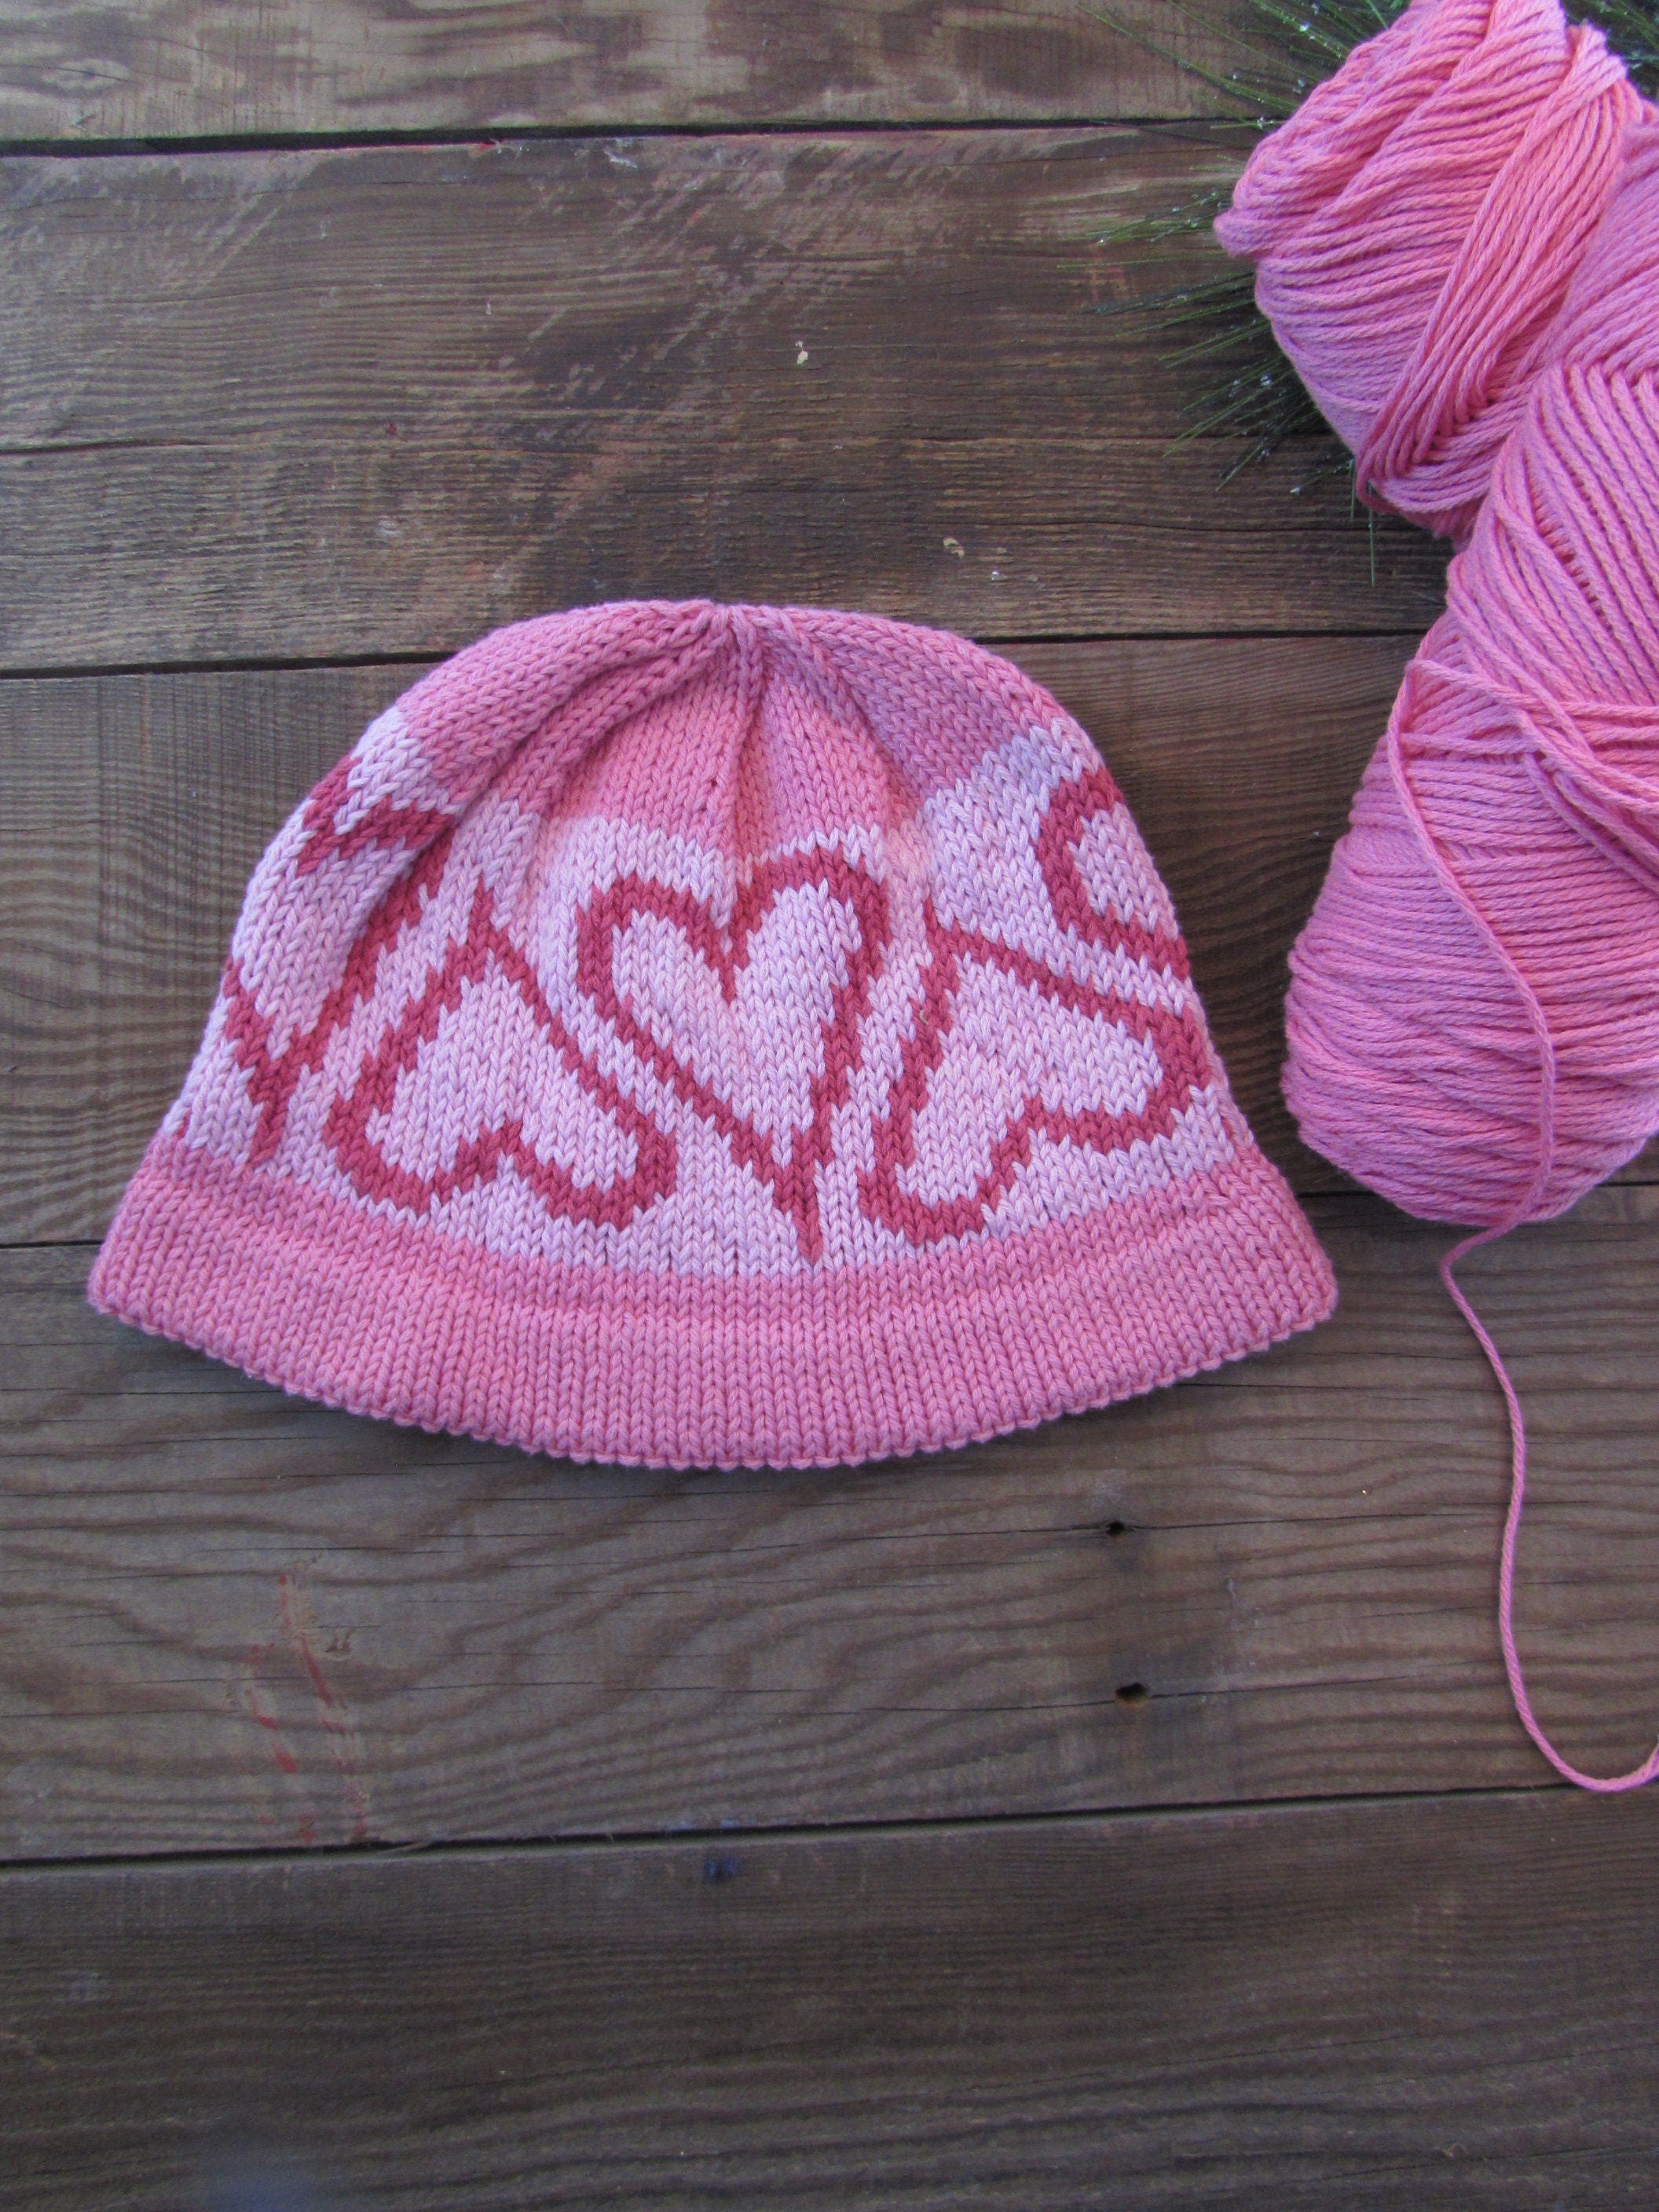 How To Knit A Toddler's Hat